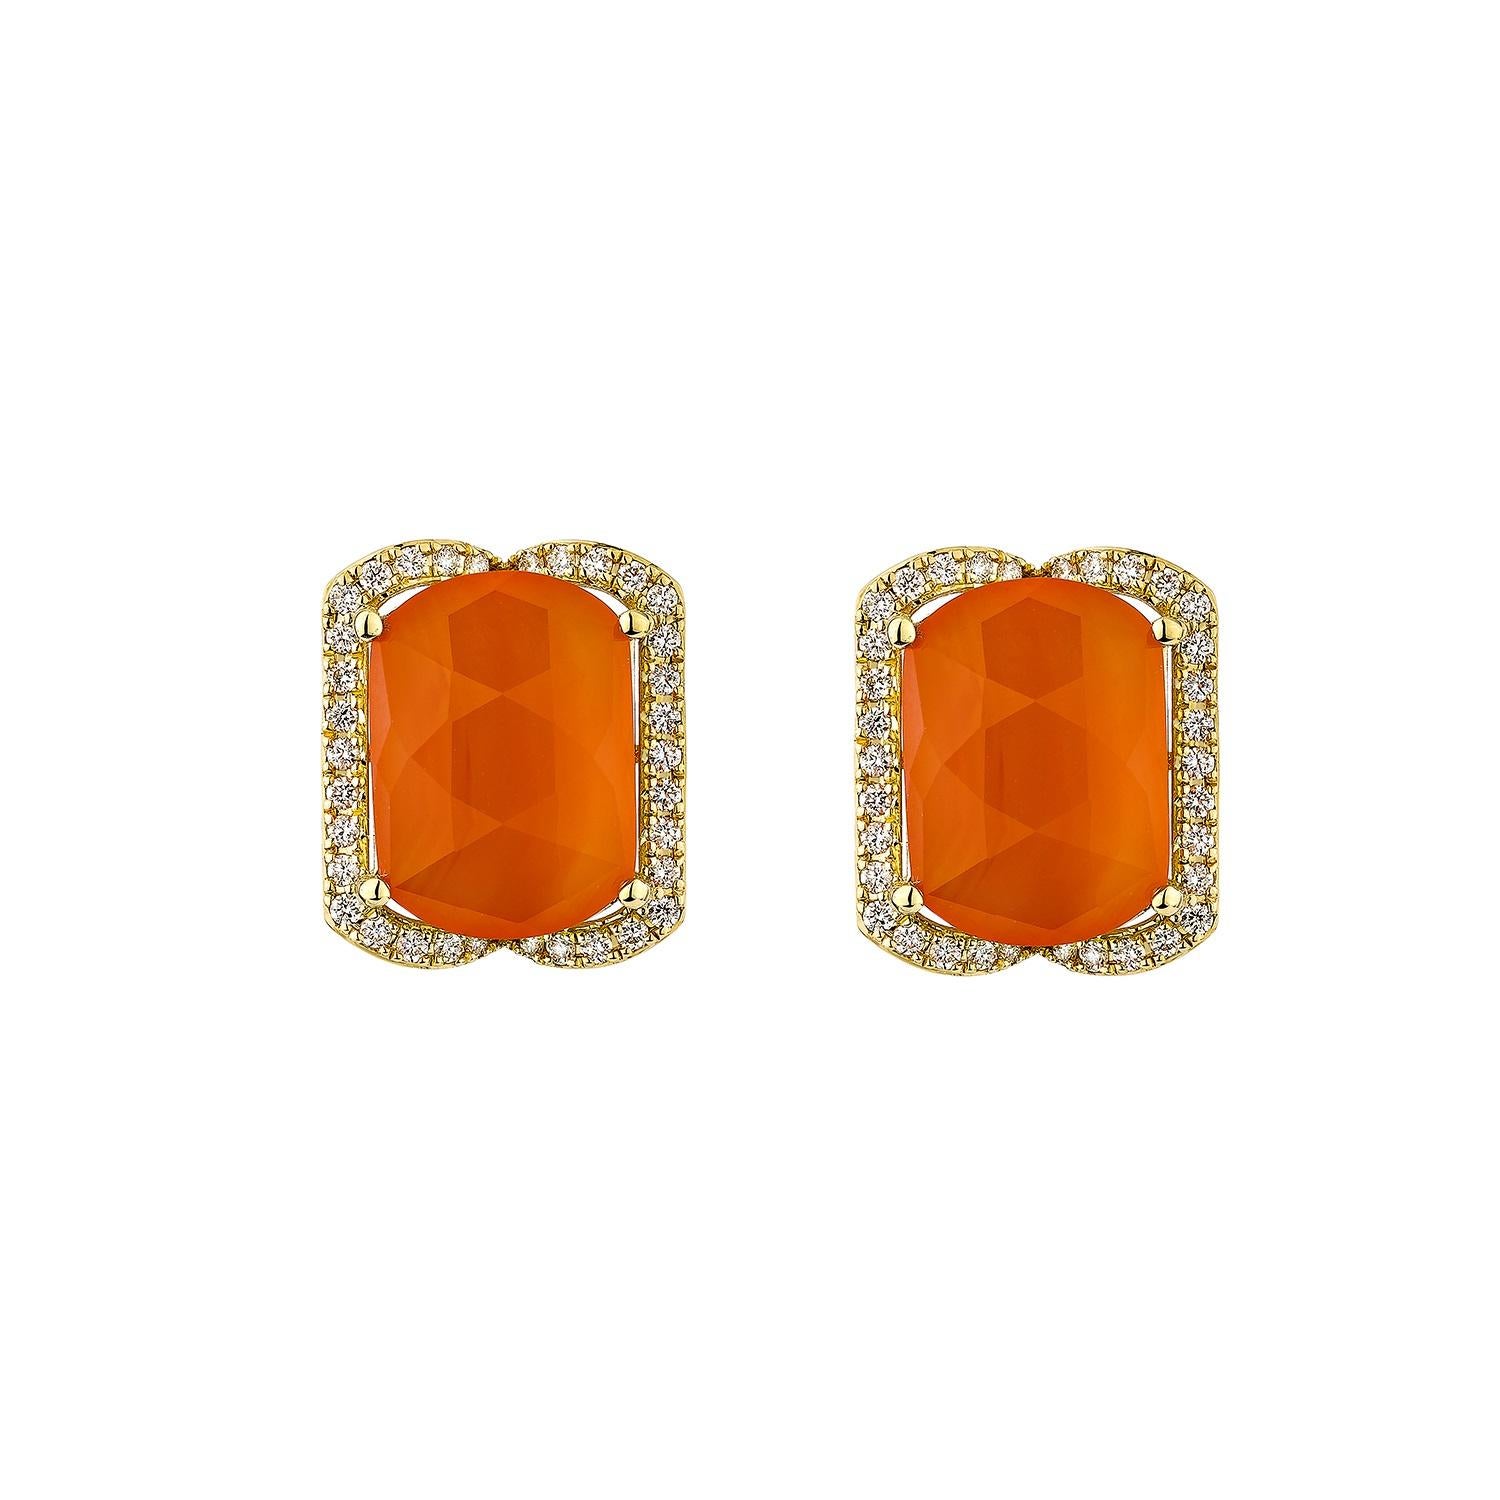 Contemporary 12.59 Carat Carnelian Stud Earring in 18Karat Yellow Gold with White Diamond. For Sale